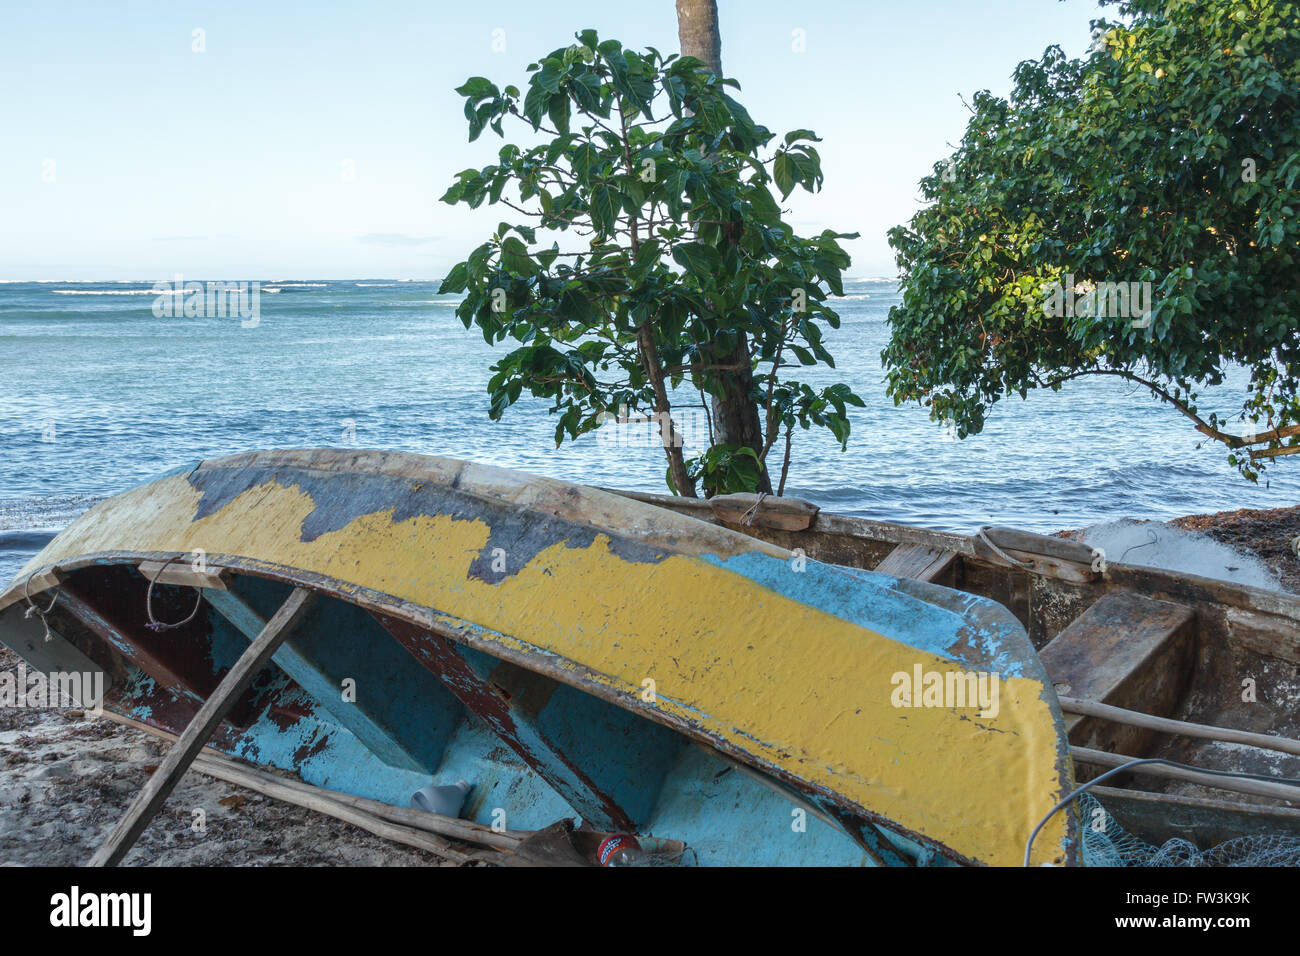 Old fishing boats on the shore at a beach in the Dominican Republic Stock Photo